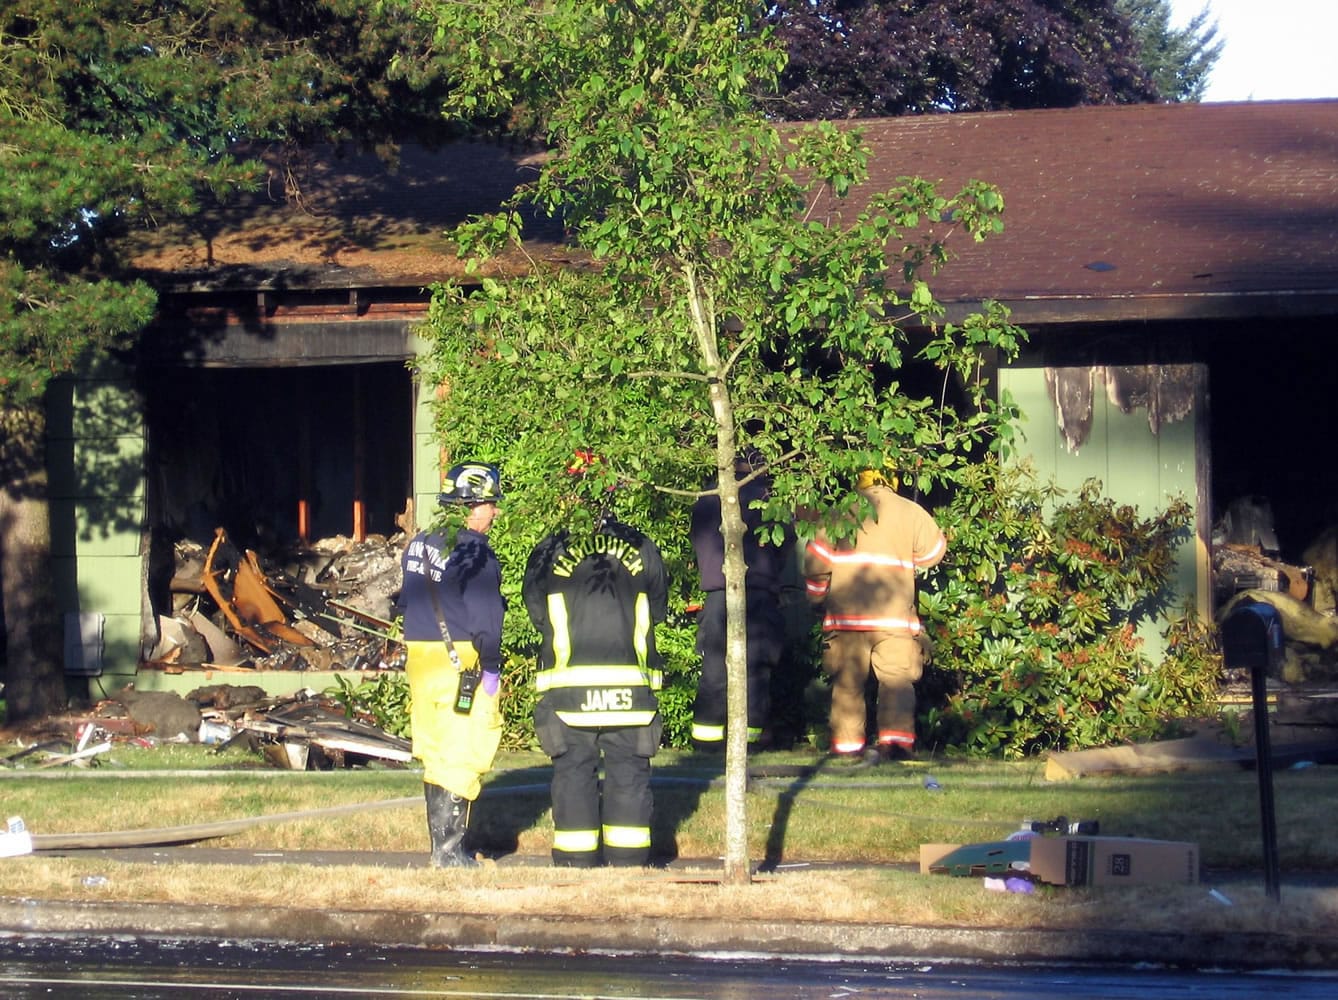 Vancouver firefighters work a house fire on Lieser Road early Monday morning.